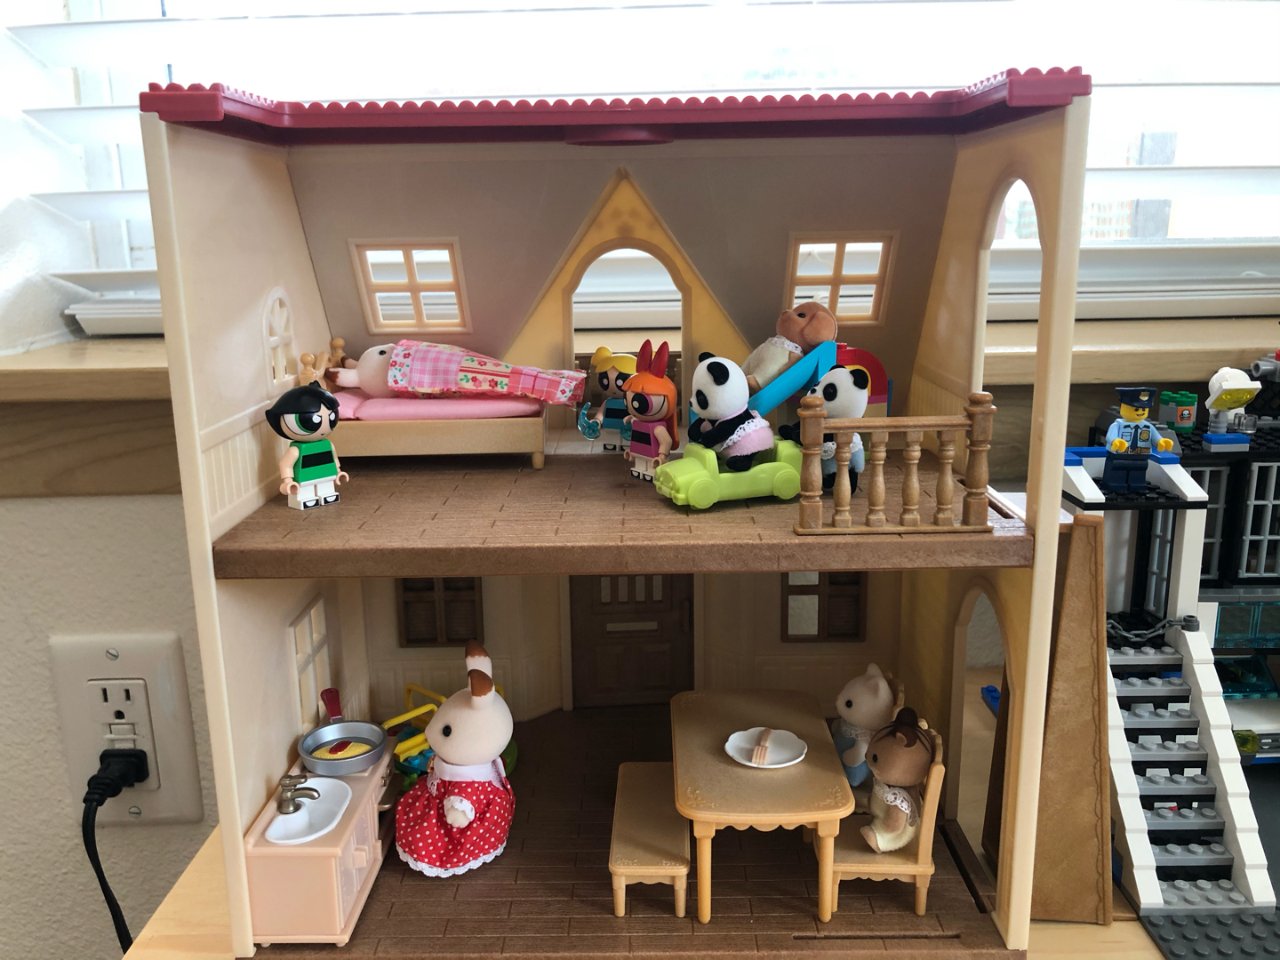 Calico critters